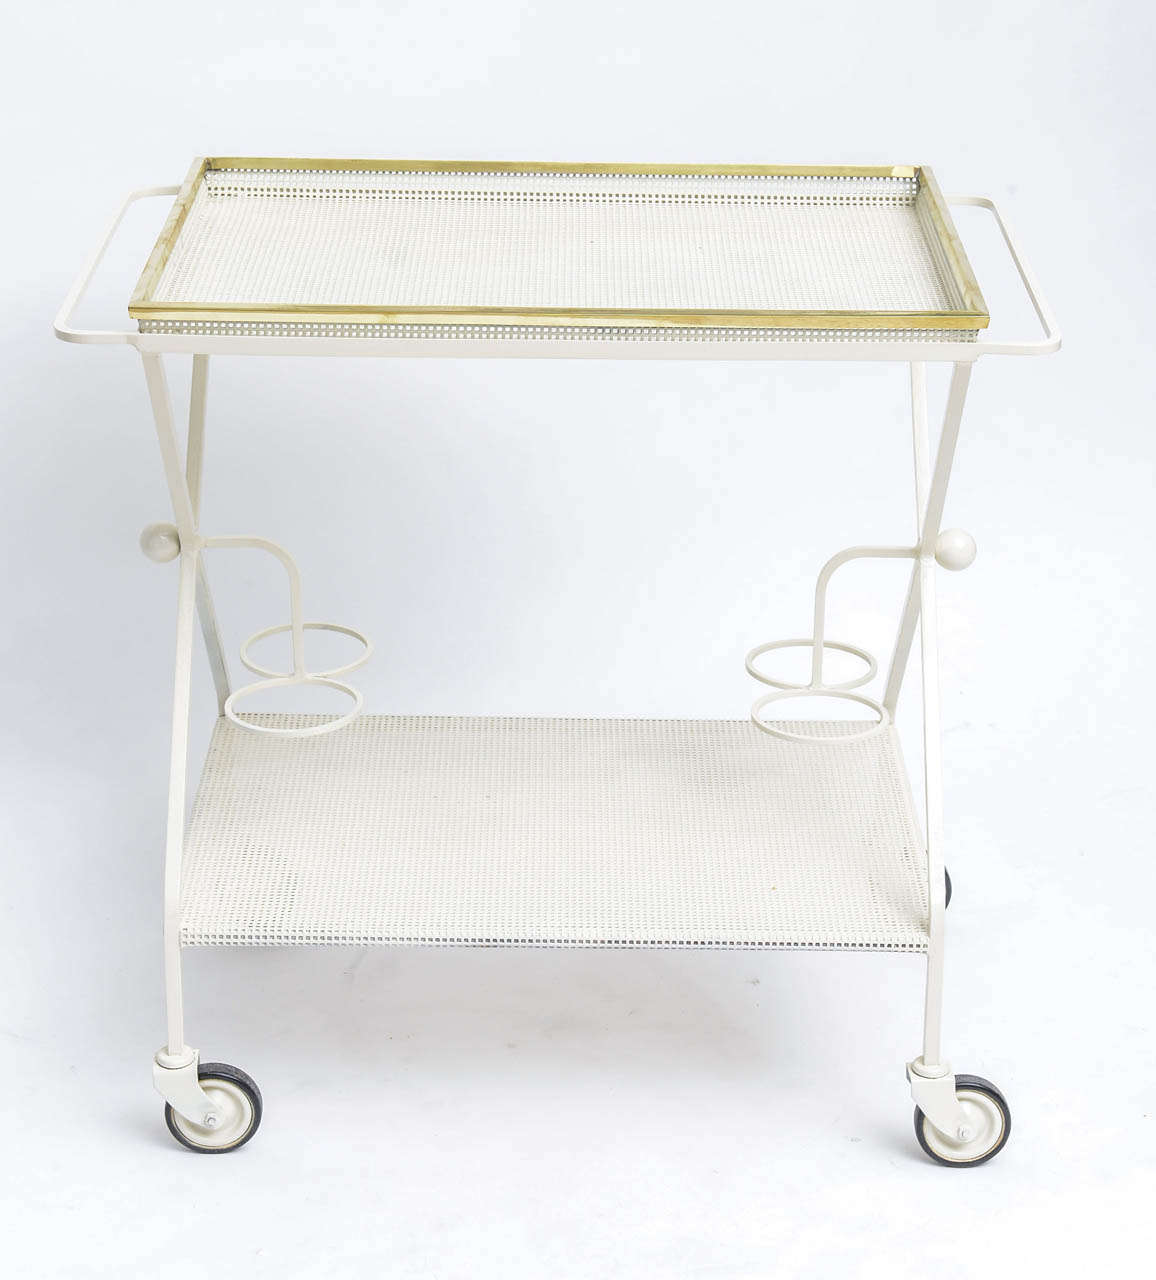 Perforated metal bar cart in the manner of Mathieu Mategot, with bronze-edged, lift-off tray. We've had the bronze professionally polished, but left un-lacquered to allow natural tarnishing.